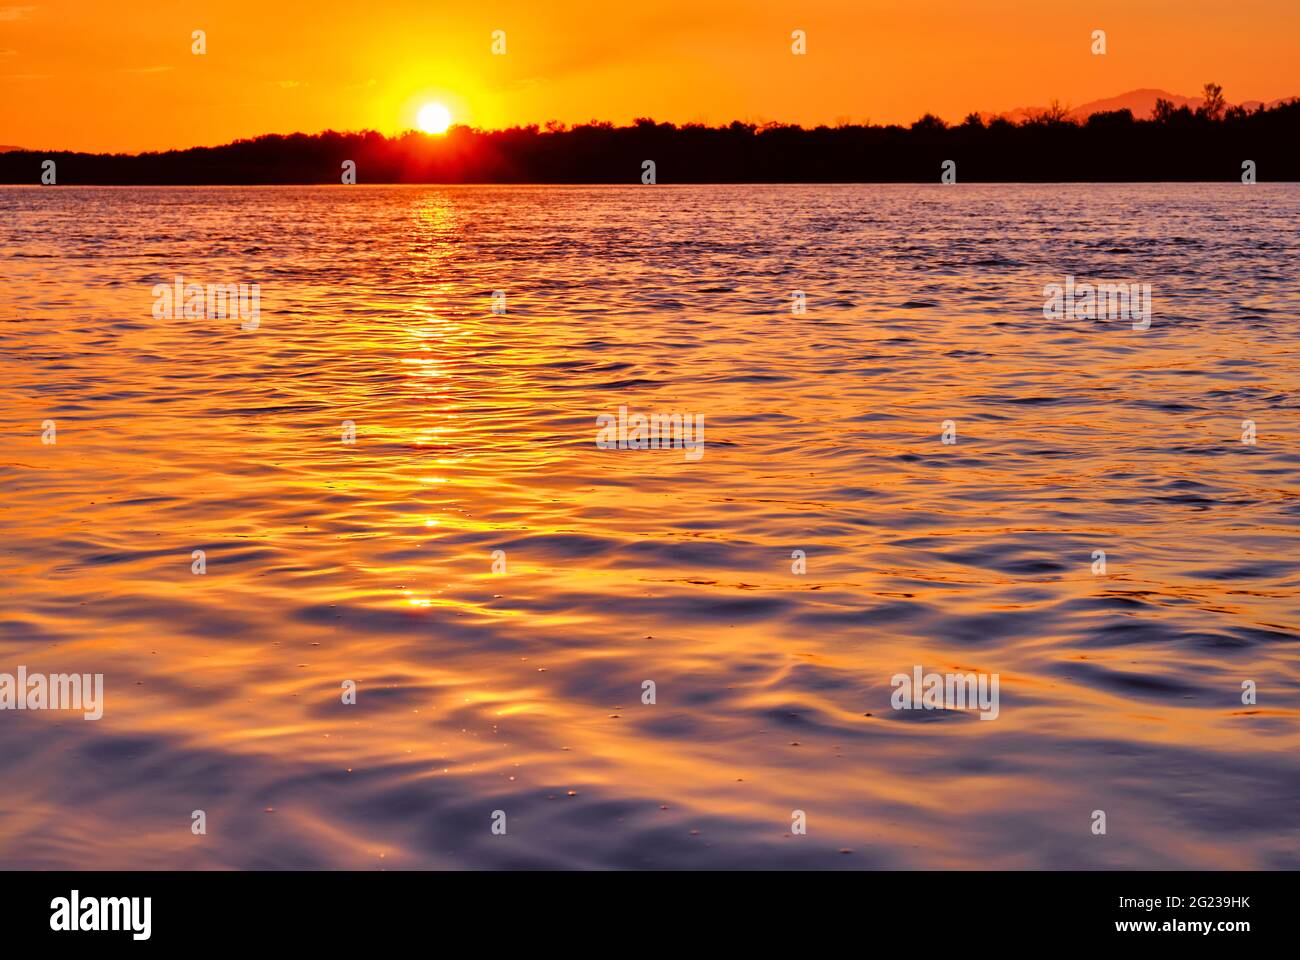 Soft sunlight of the setting sun on the waves; sunset on the river Stock Photo